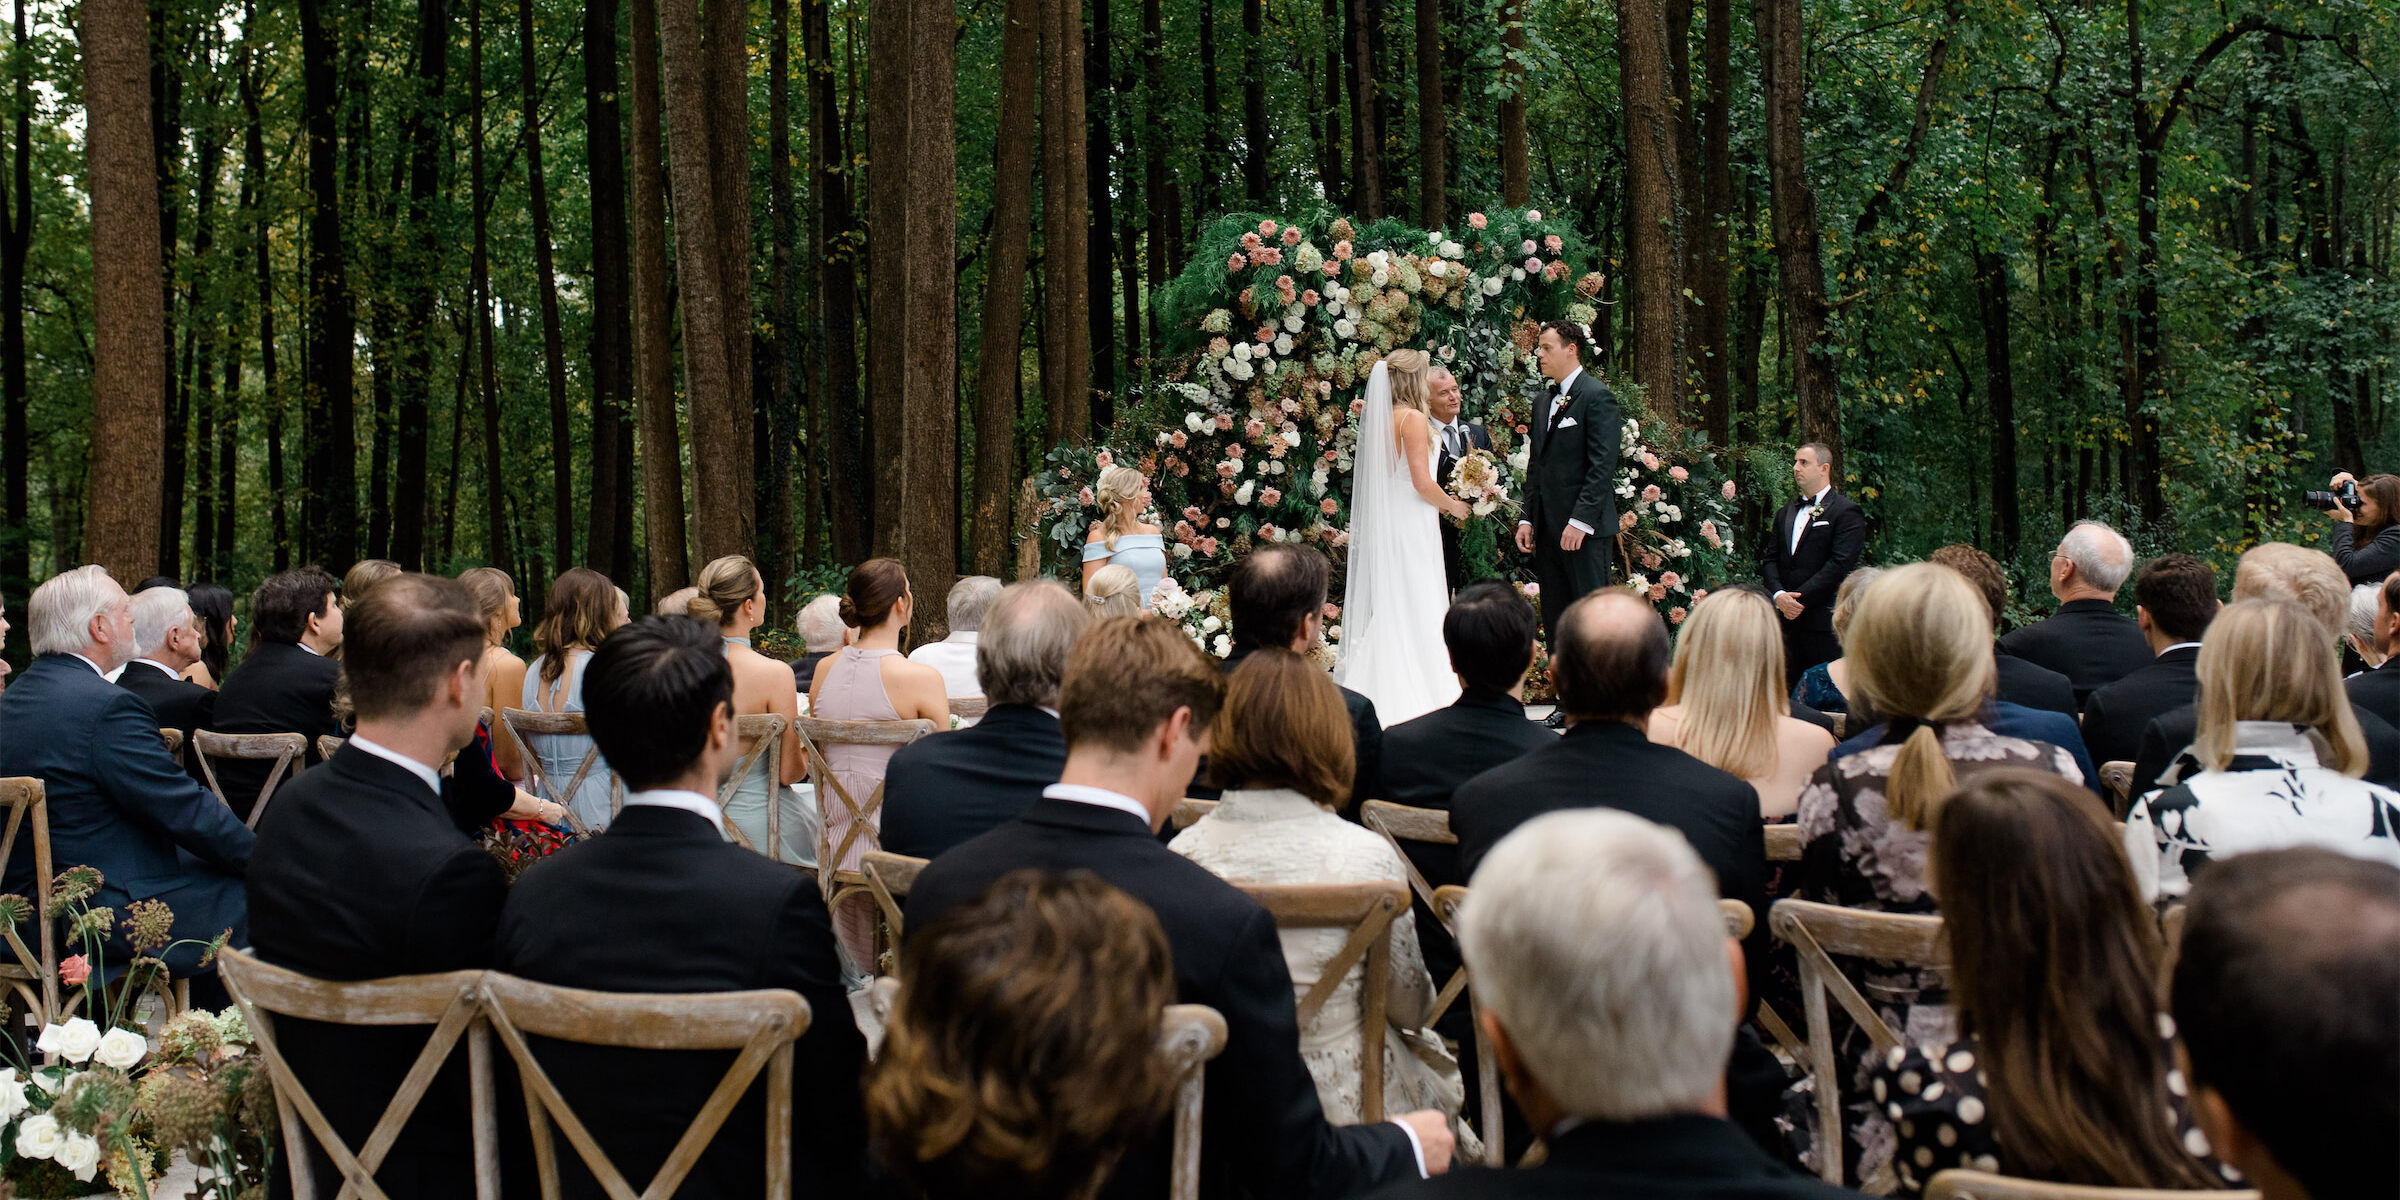 A pair of newlyweds standing at the flower-lined alter at their rustic outdoor wedding in Virginia.